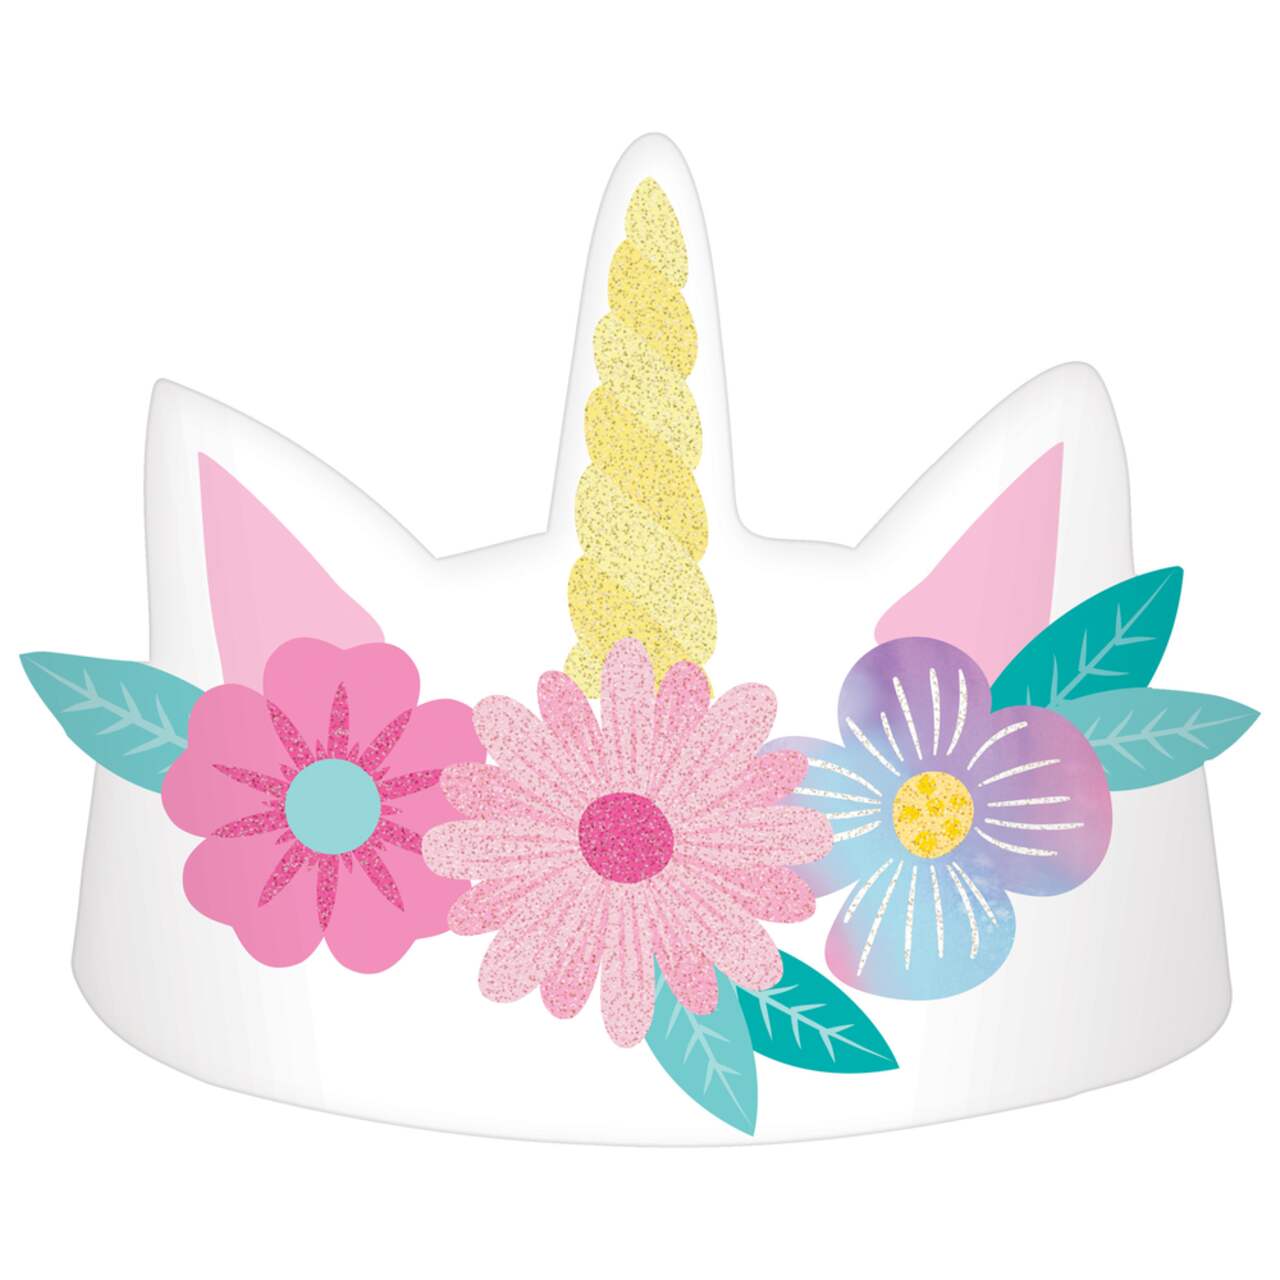 Unicorn Flower Crown with Horn Headband, Multi-Coloured, One Size, 8-pk,  Wearable Accessories for Birthdays